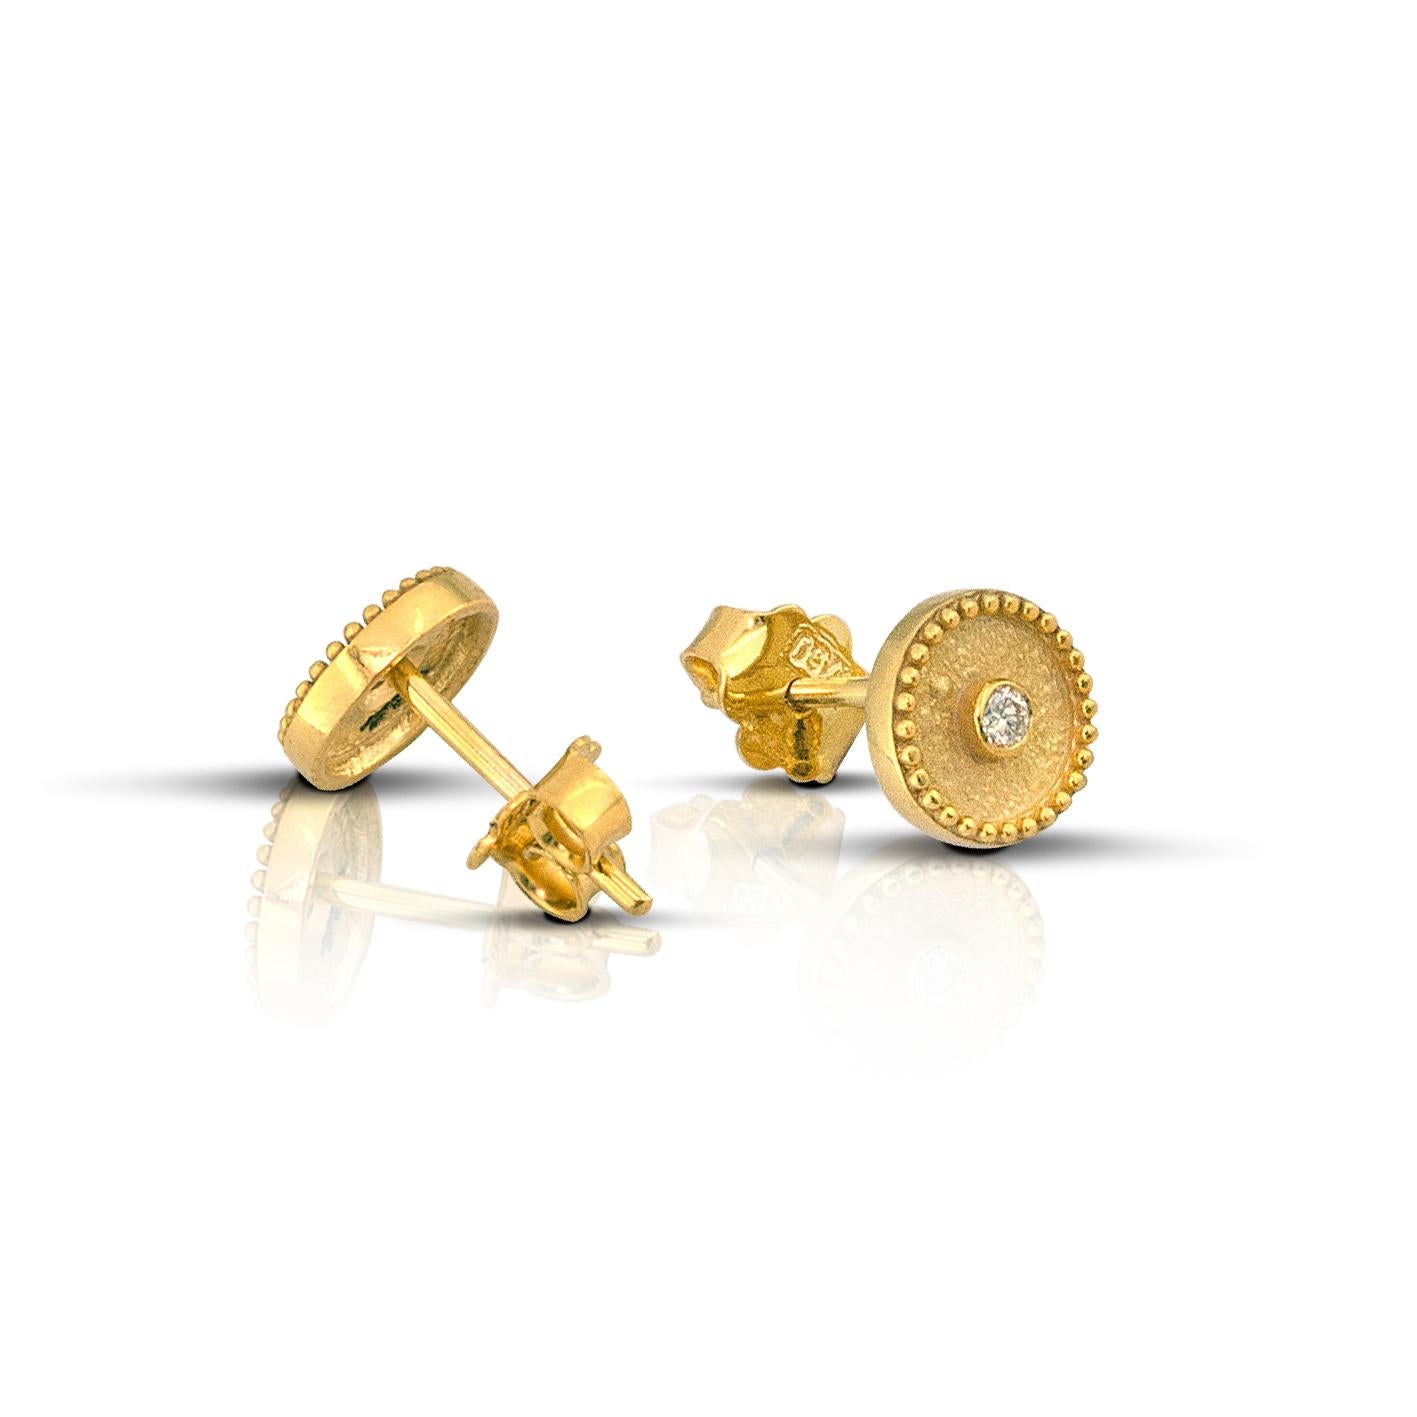 These S.Georgios Earrings are 18 Karat yellow gold and all handmade. The earrings are microscopically decorated with granulation workmanship and feature a unique velvet look on the background. They have 2 Brilliant cut Diamonds total weight of 0,07